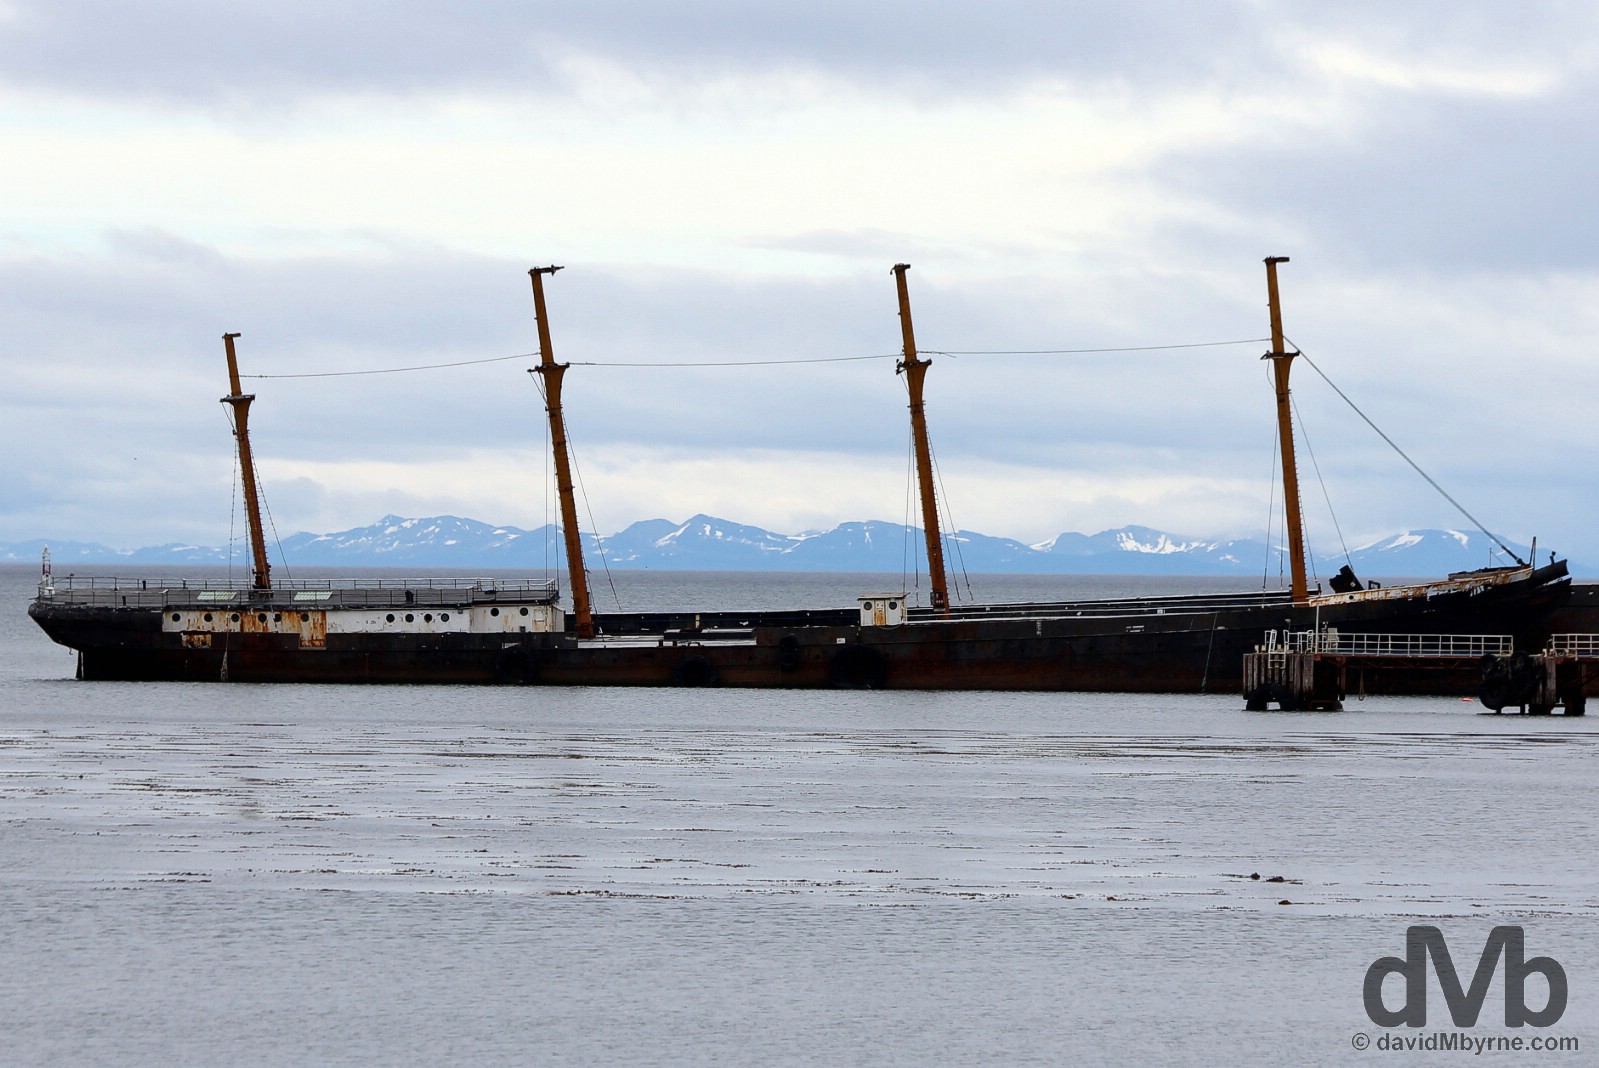 The wreck of the windjammer 'County of Peebles', world's first four-masted, iron-hulled full-rigged ship, now beached as a breakwater in Punta Arenas, Chile. November 10, 2015.